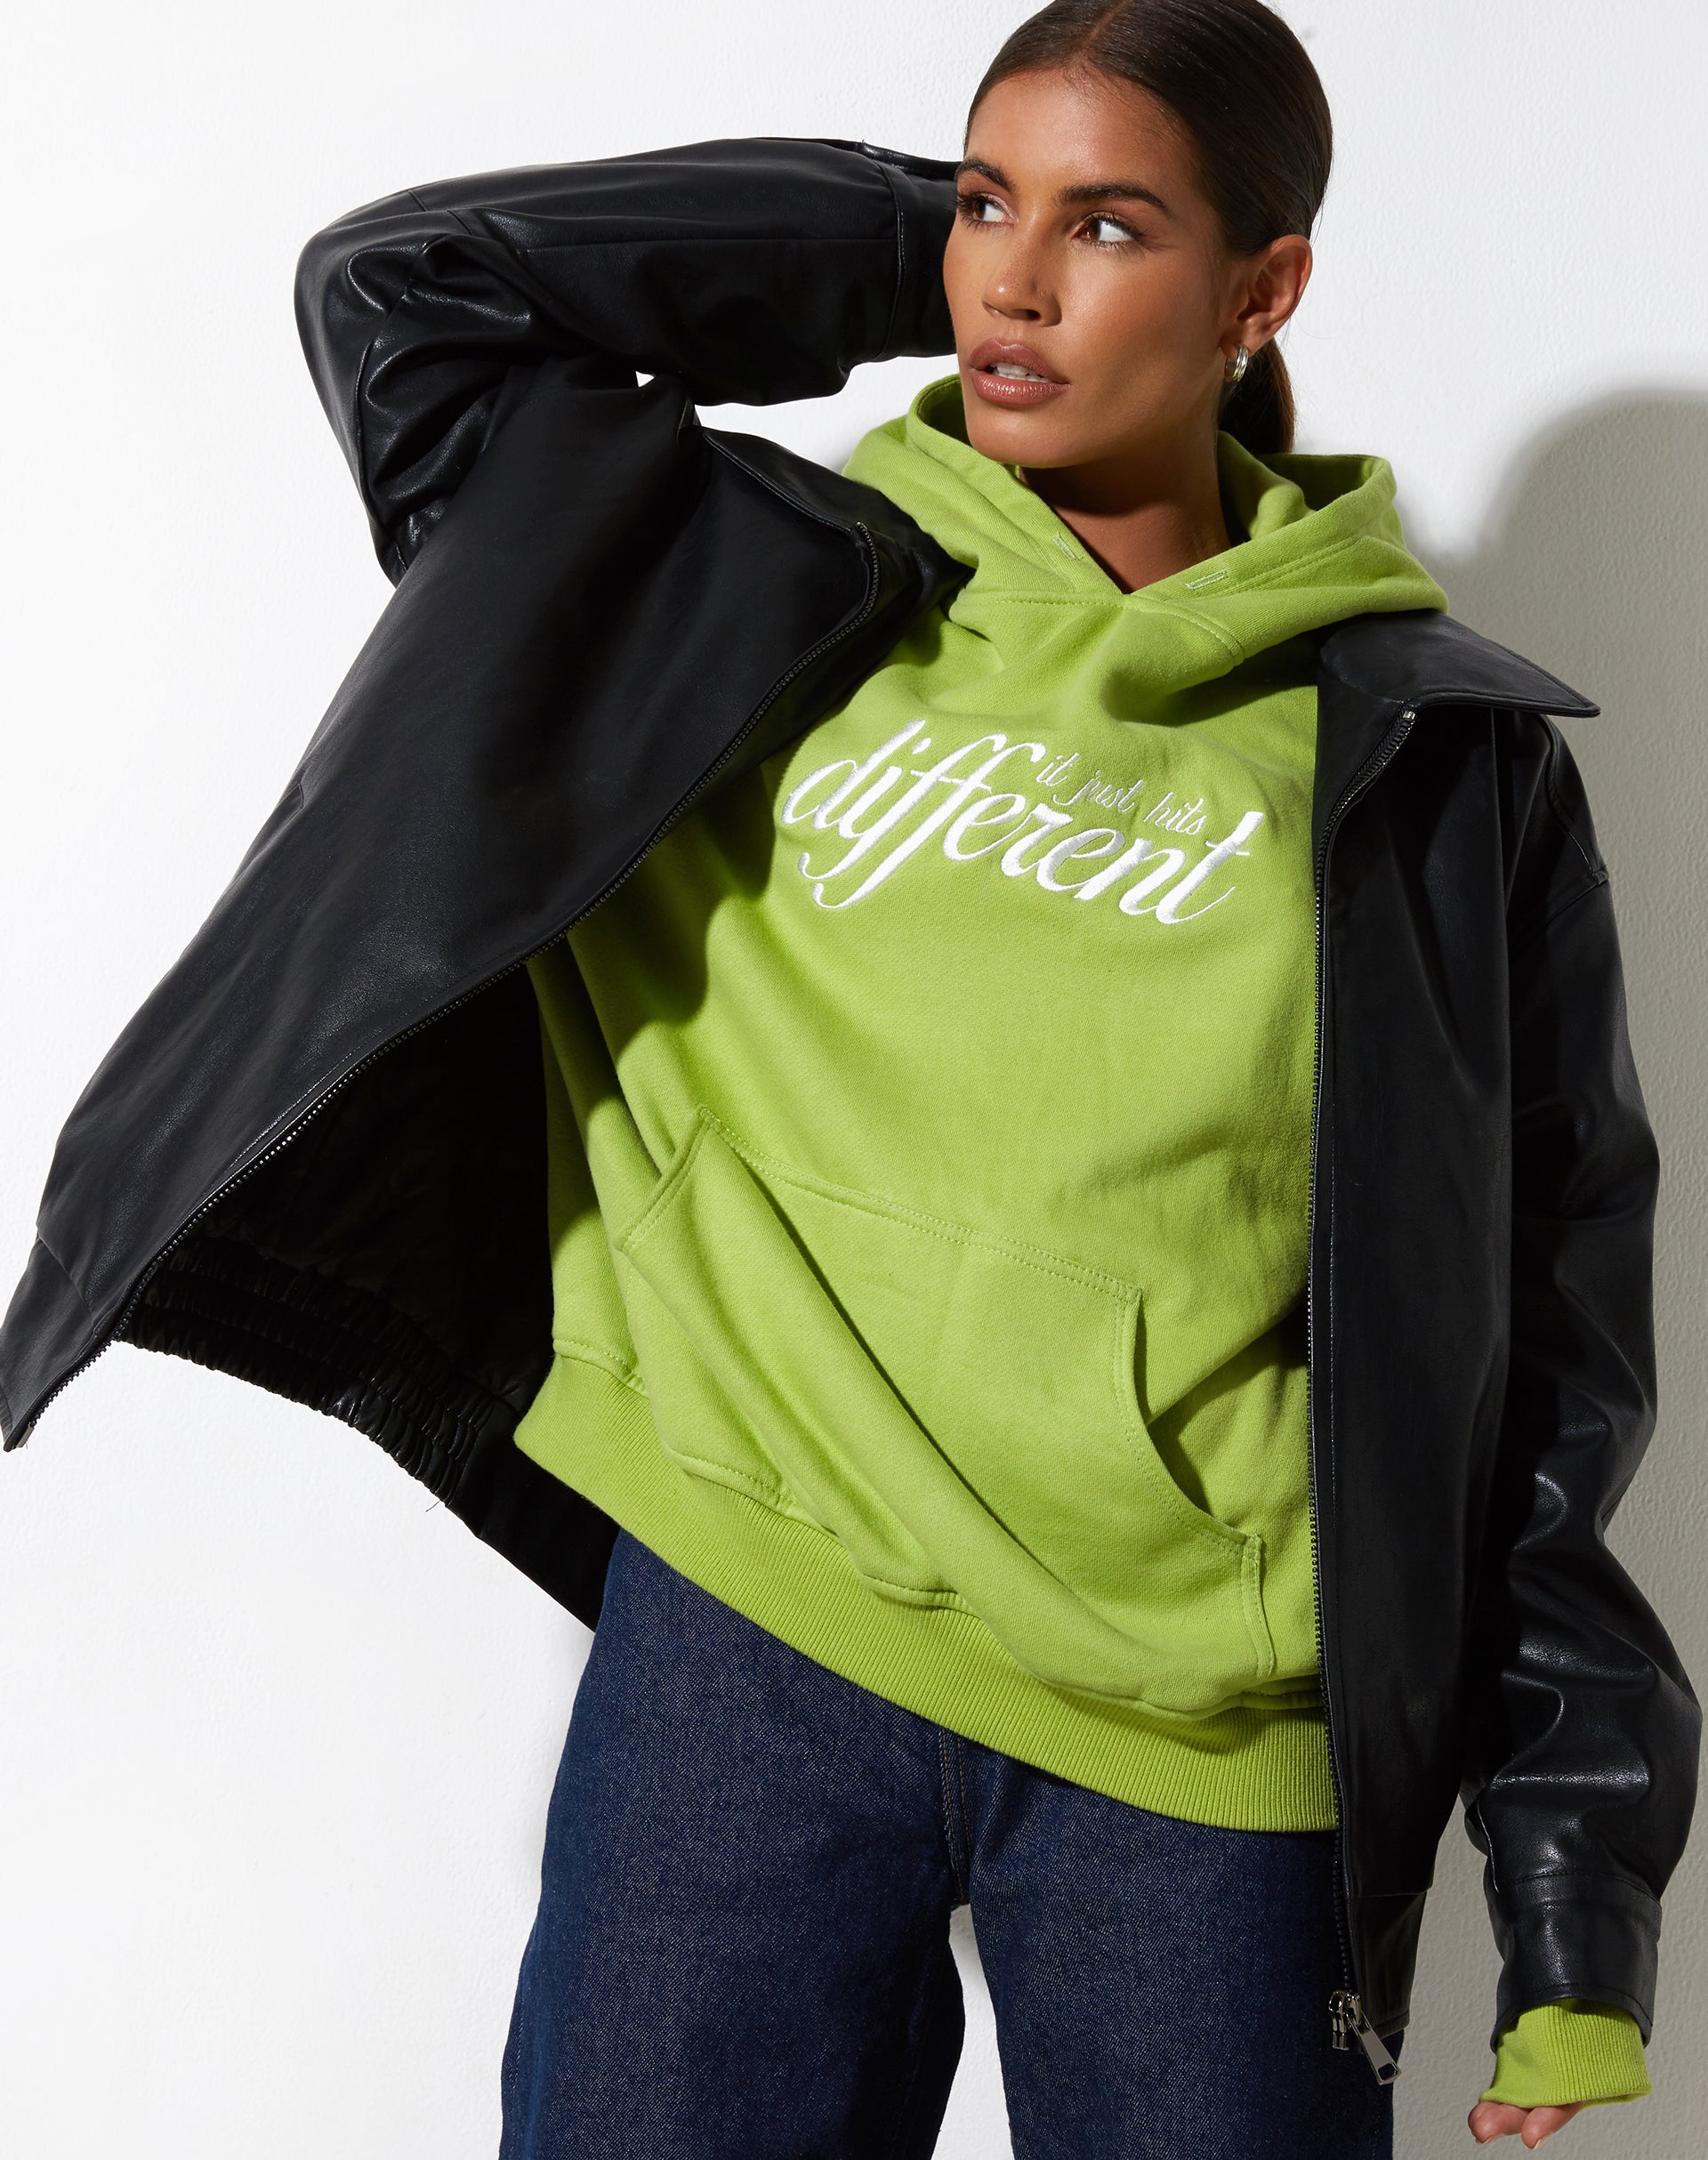 Oversize Hoodie in Leaf Green Different Embro White